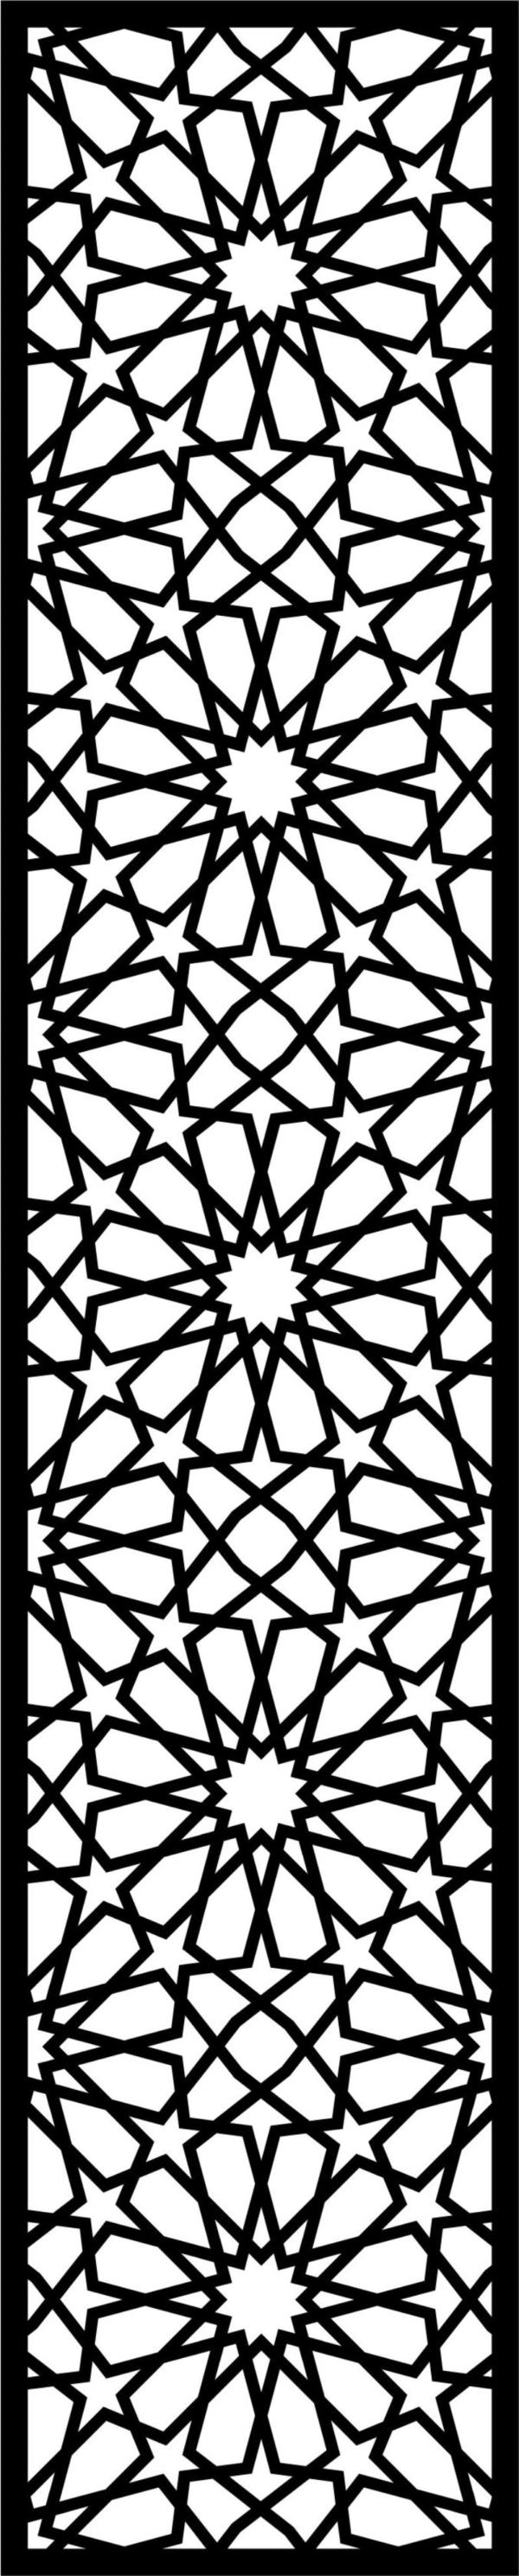 Privacy Partition Indoor Panels Floral Lattice Stencil Room Divider Pattern Free DXF File